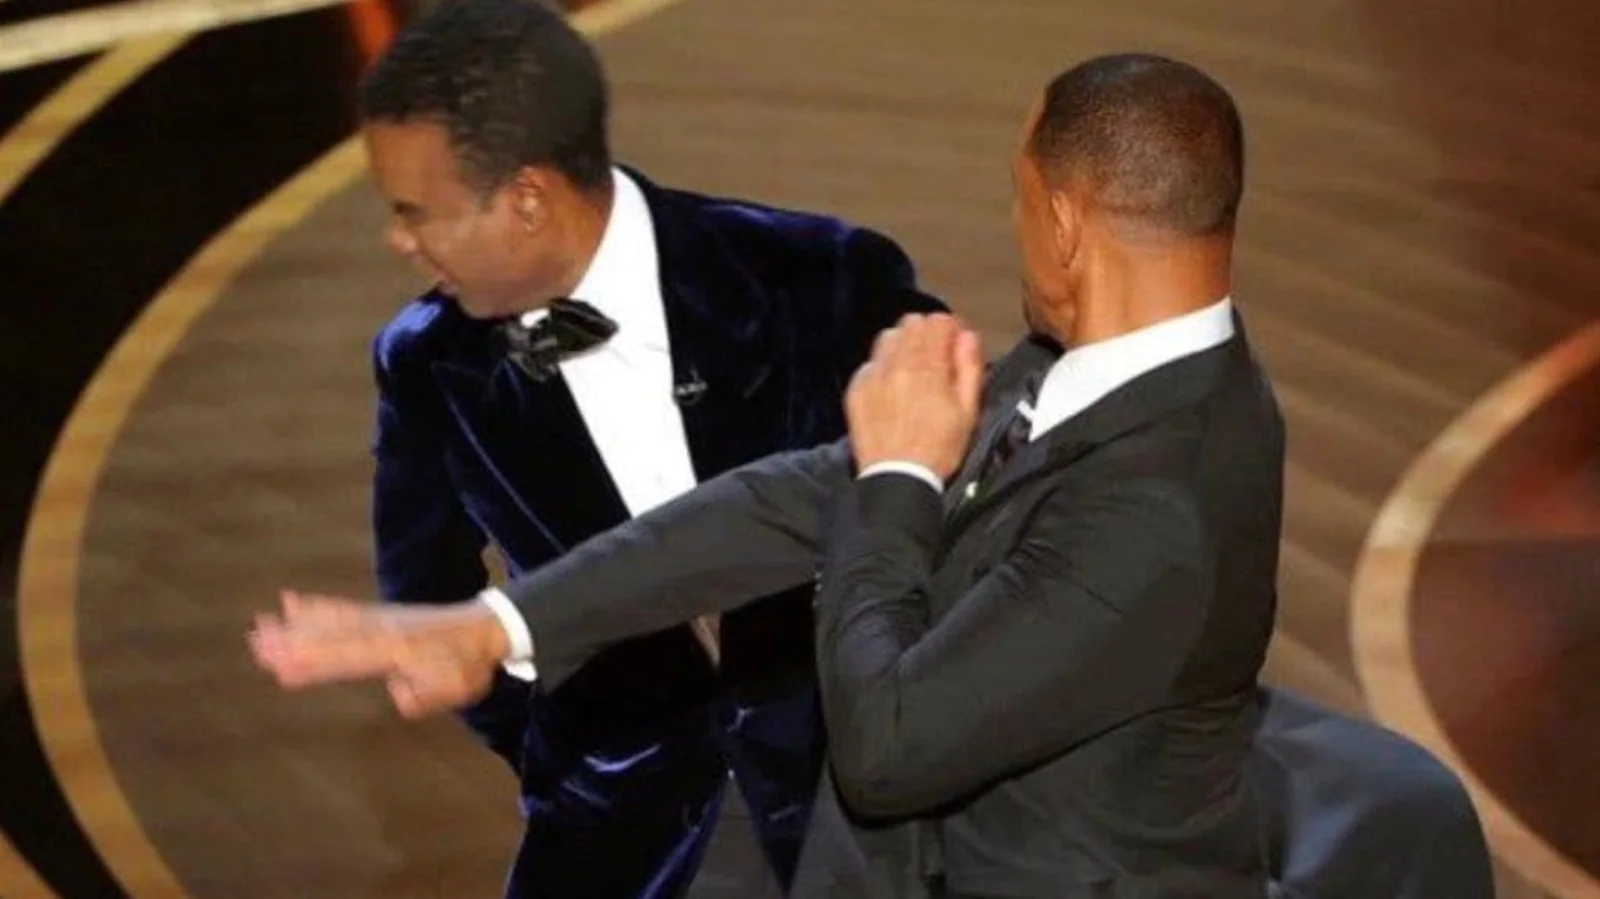 Will Smith punching Chris Rock during Oscars 2022